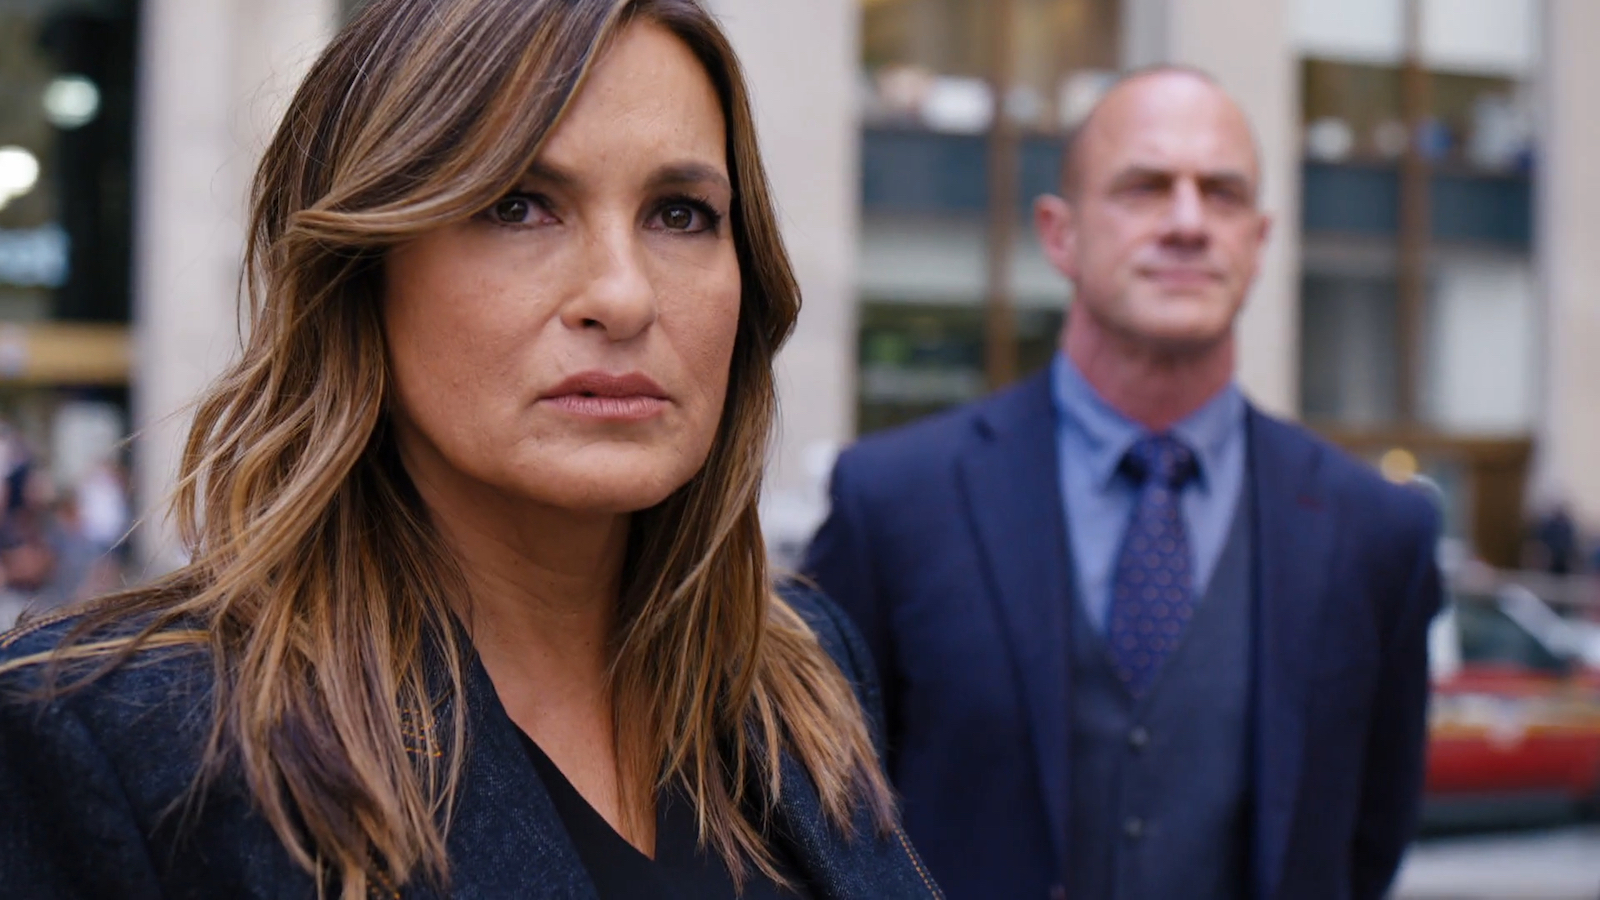 Mariska Hargitay and Christopher Meloni stare into the distance in Law & Order SVU